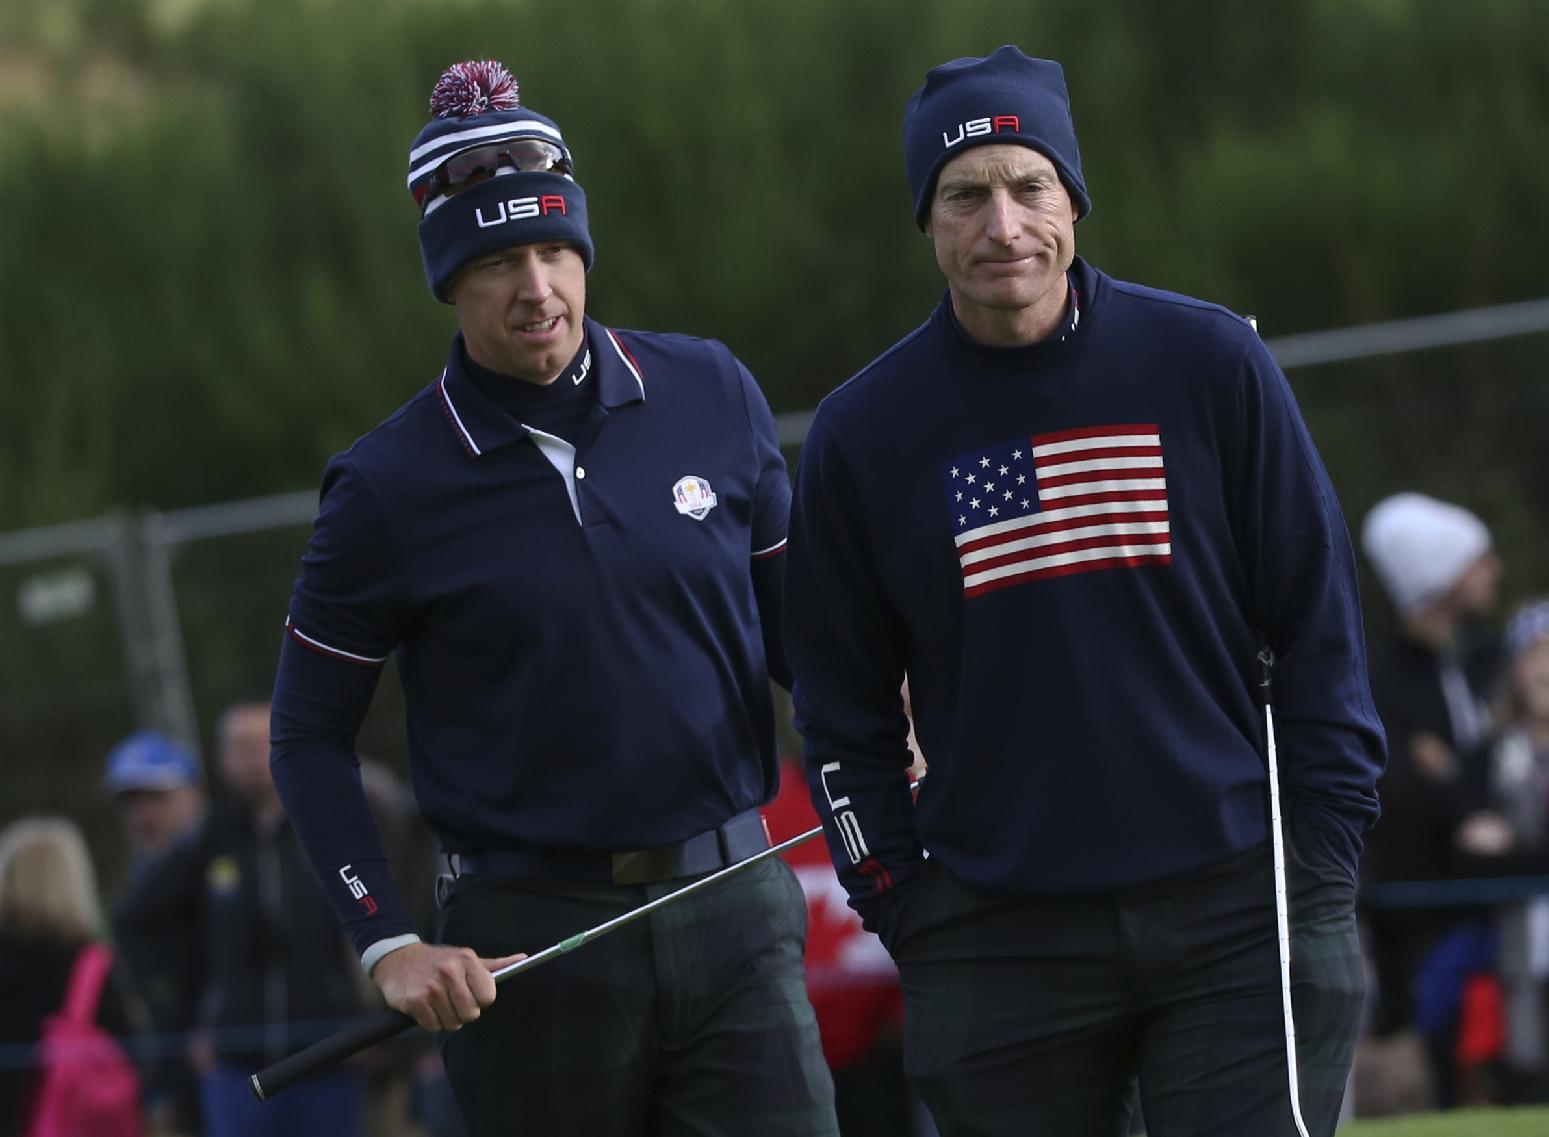 Hunter Mahan, left, and Jim Furyk of the US wait to putt on the 6th green during the fourball match on the second day of the Ryder Cup golf tournament, at Gleneagles, Scotland, Saturday, Sept. 27, 2014. (AP Photo/Scott Heppell)